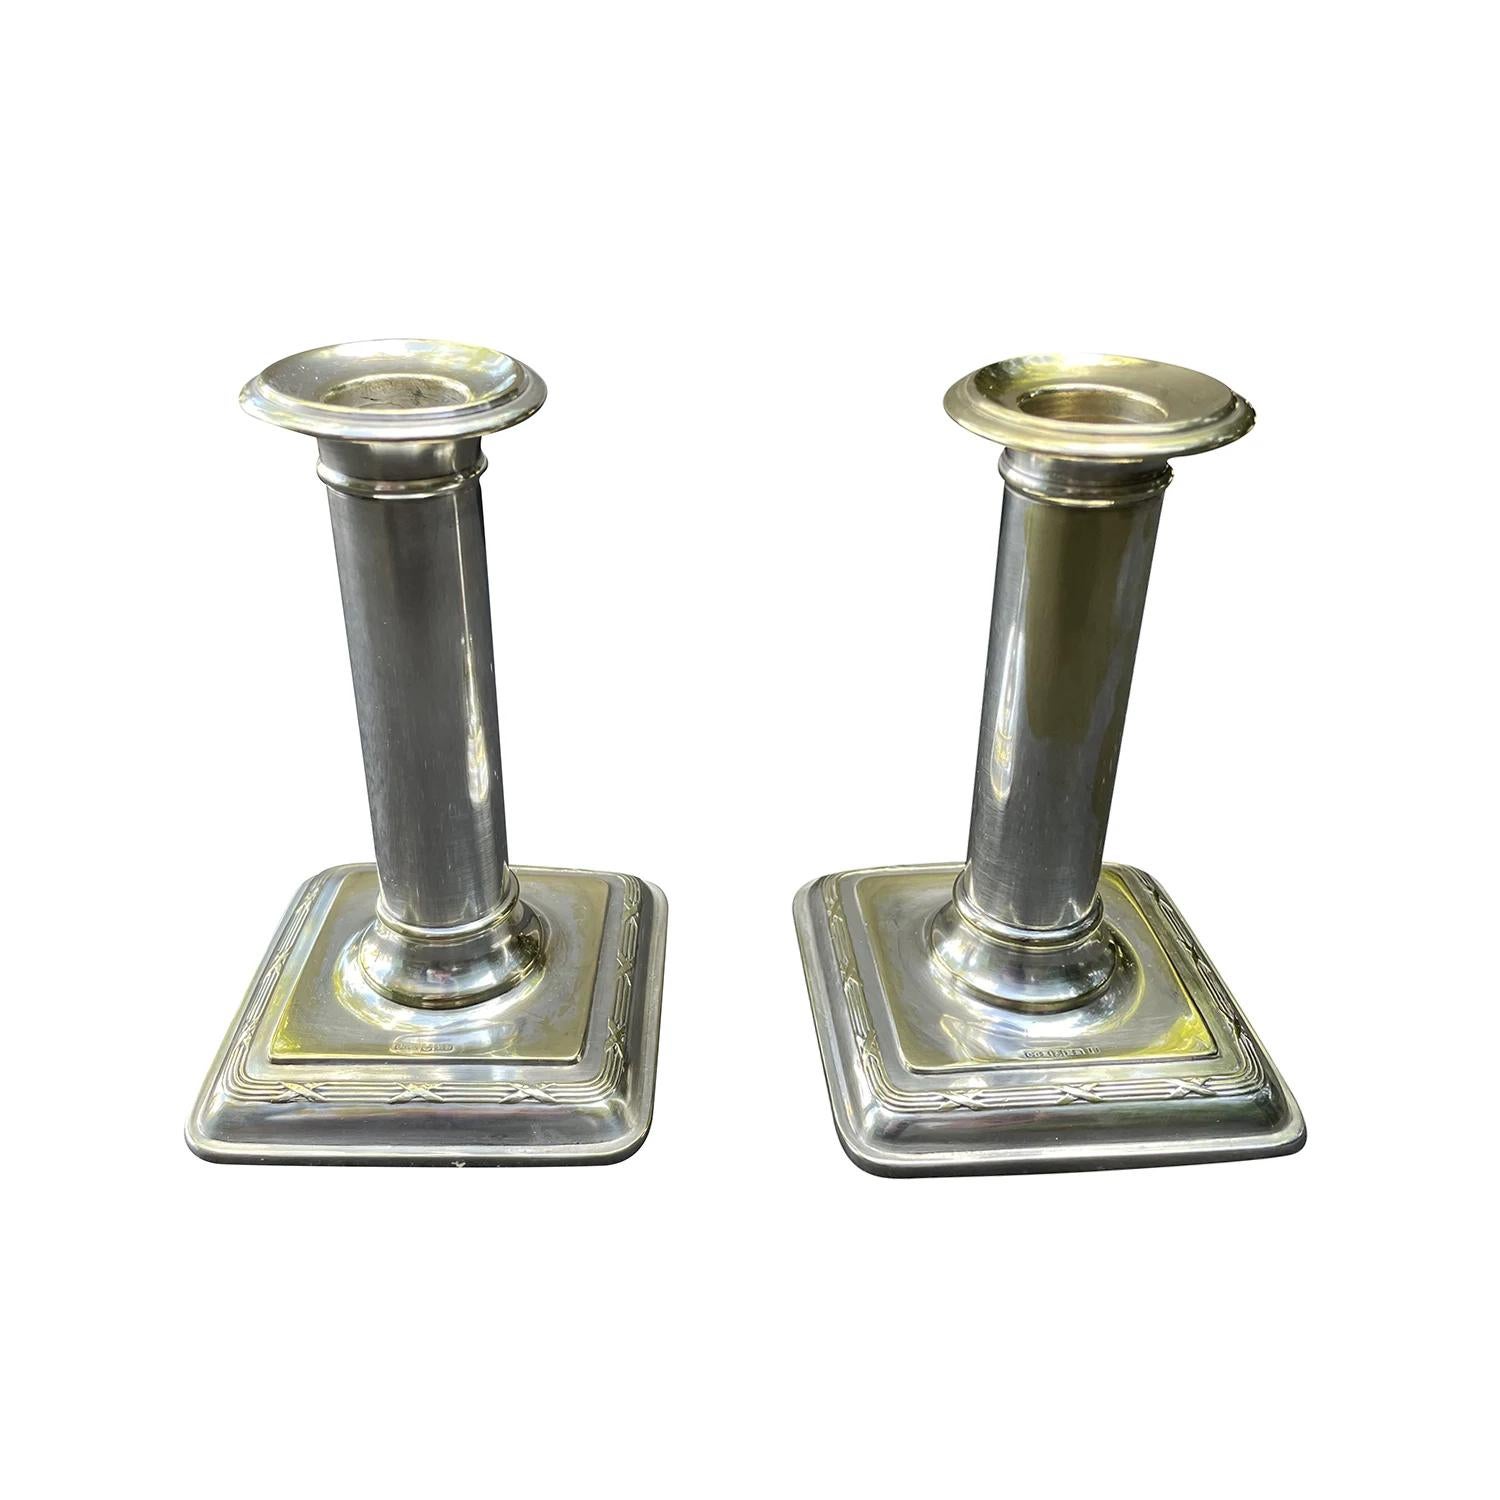 Hand-Crafted 20th Century Swedish Pair of Nickel Silver Candlesticks, Holders by CG Hallberg For Sale